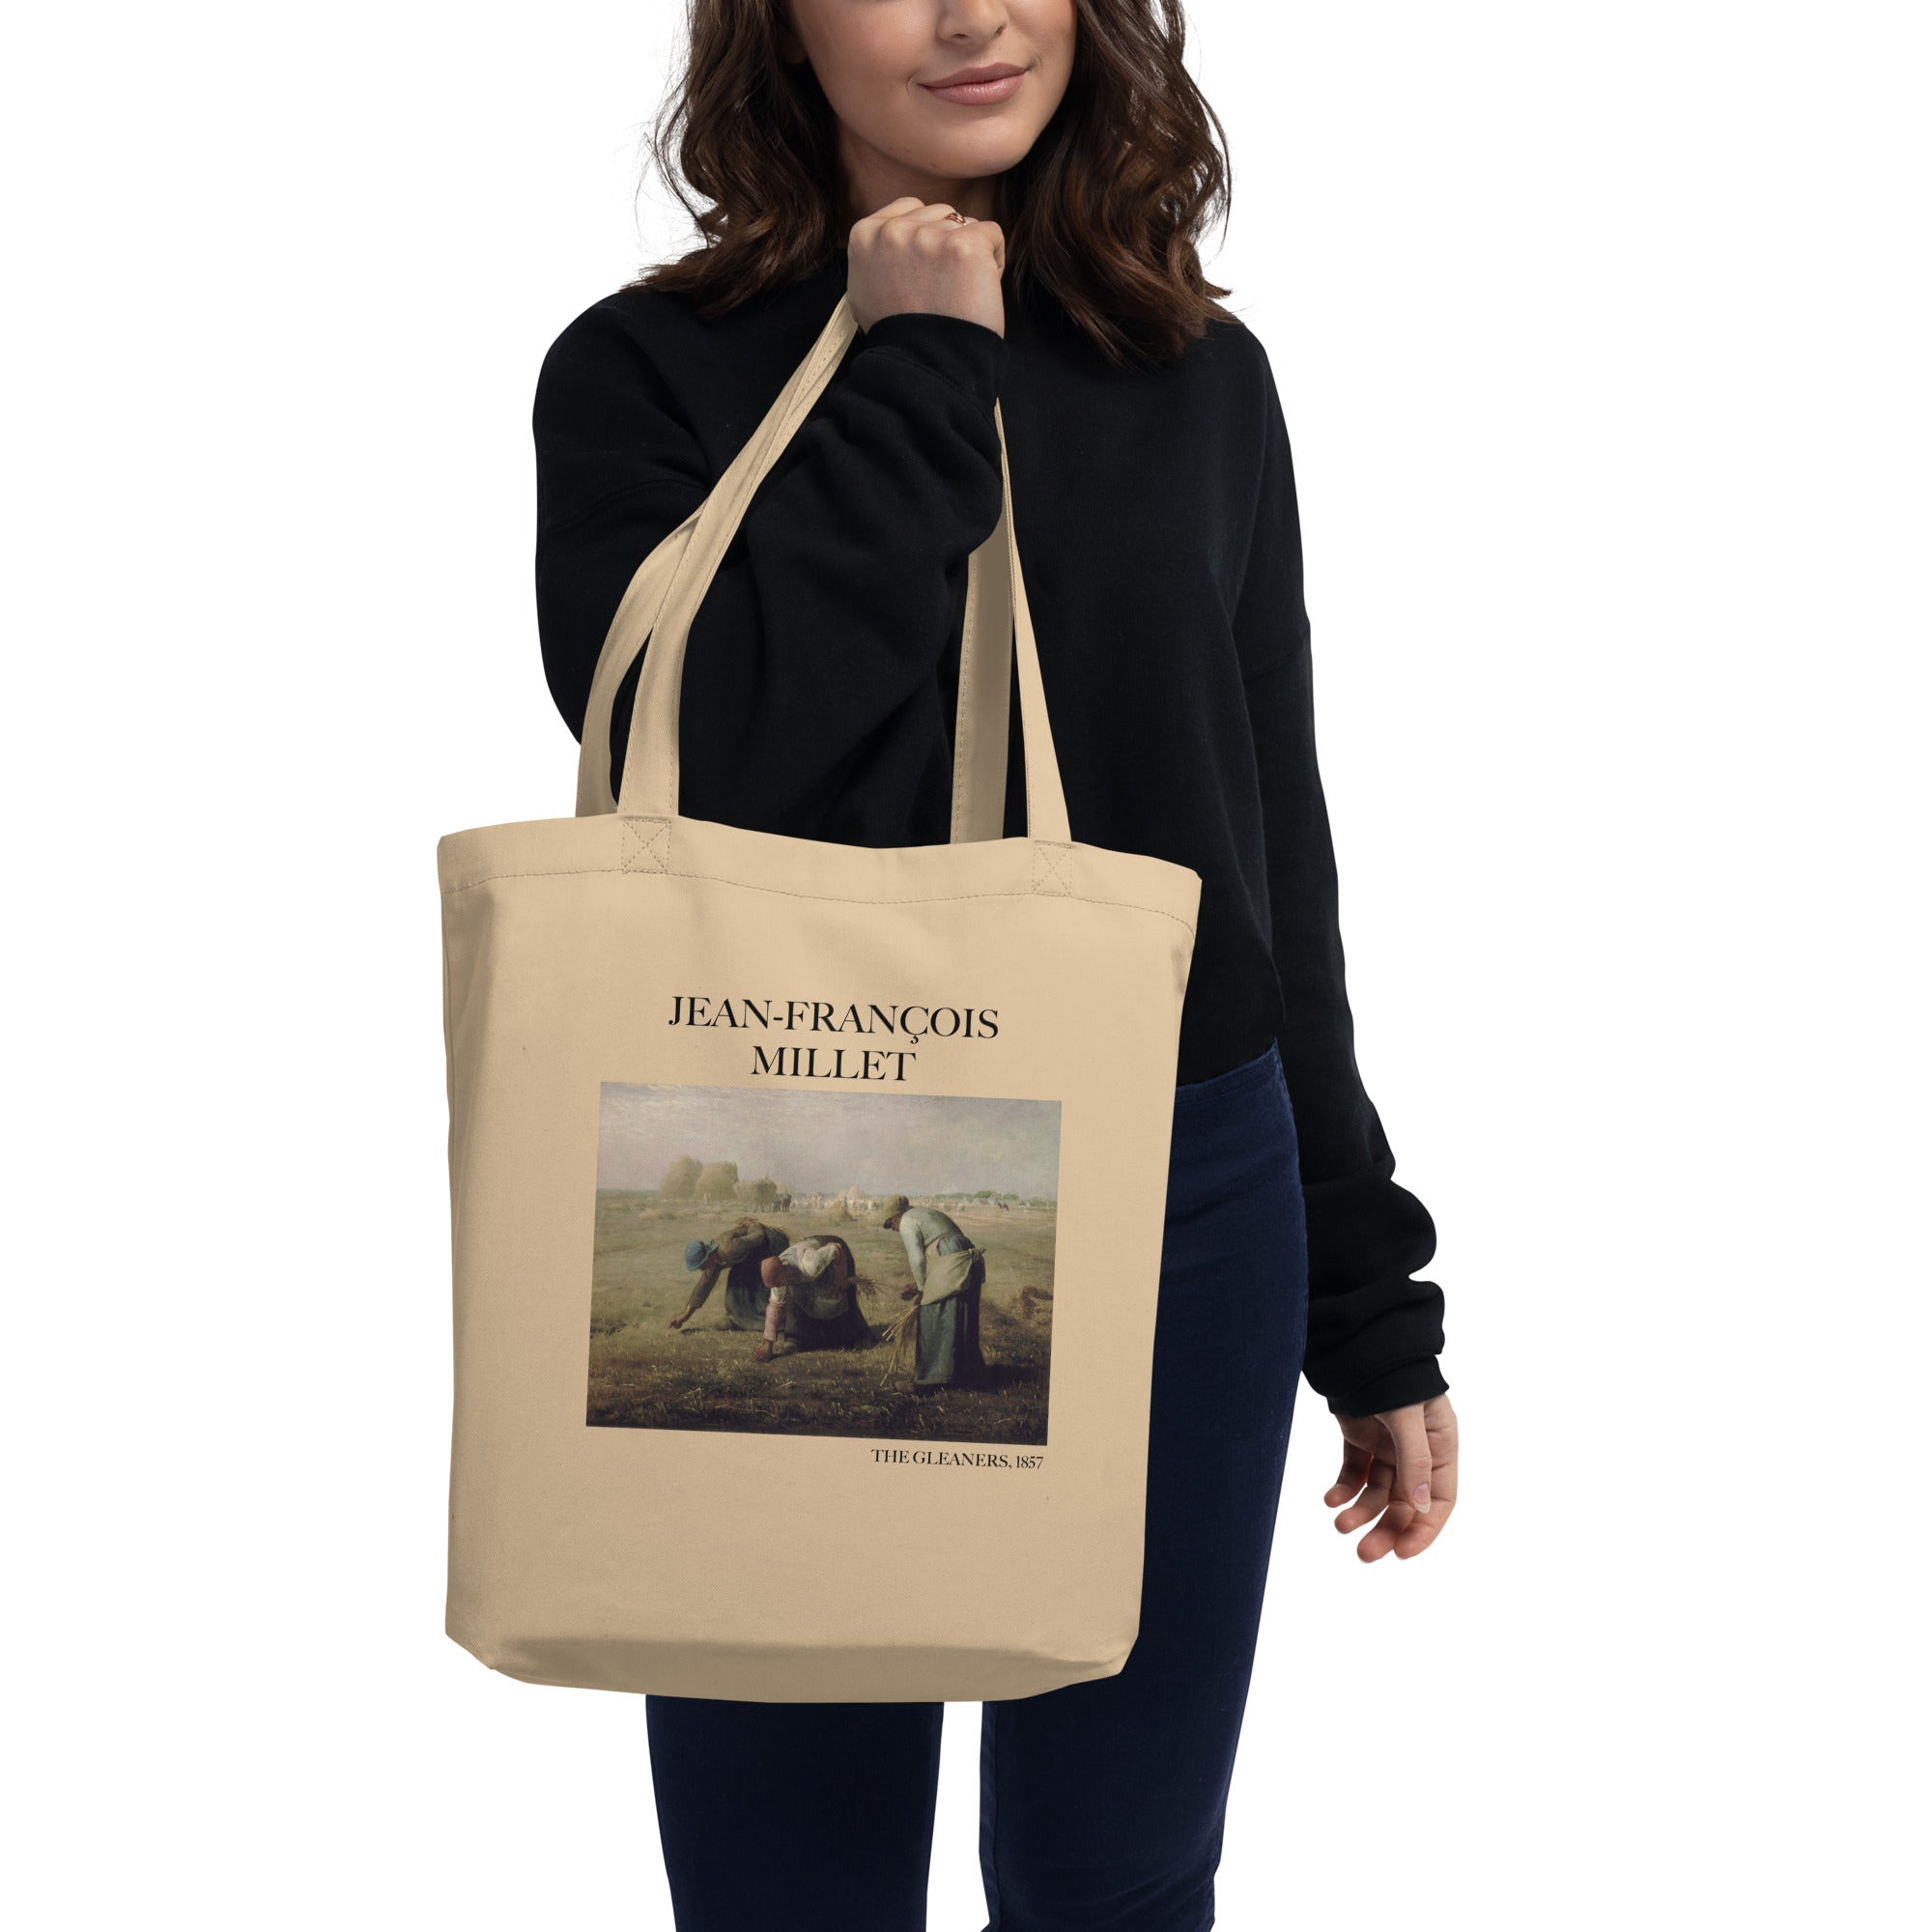 Jean-François Millet 'The Gleaners' Famous Painting Totebag | Eco Friendly Art Tote Bag